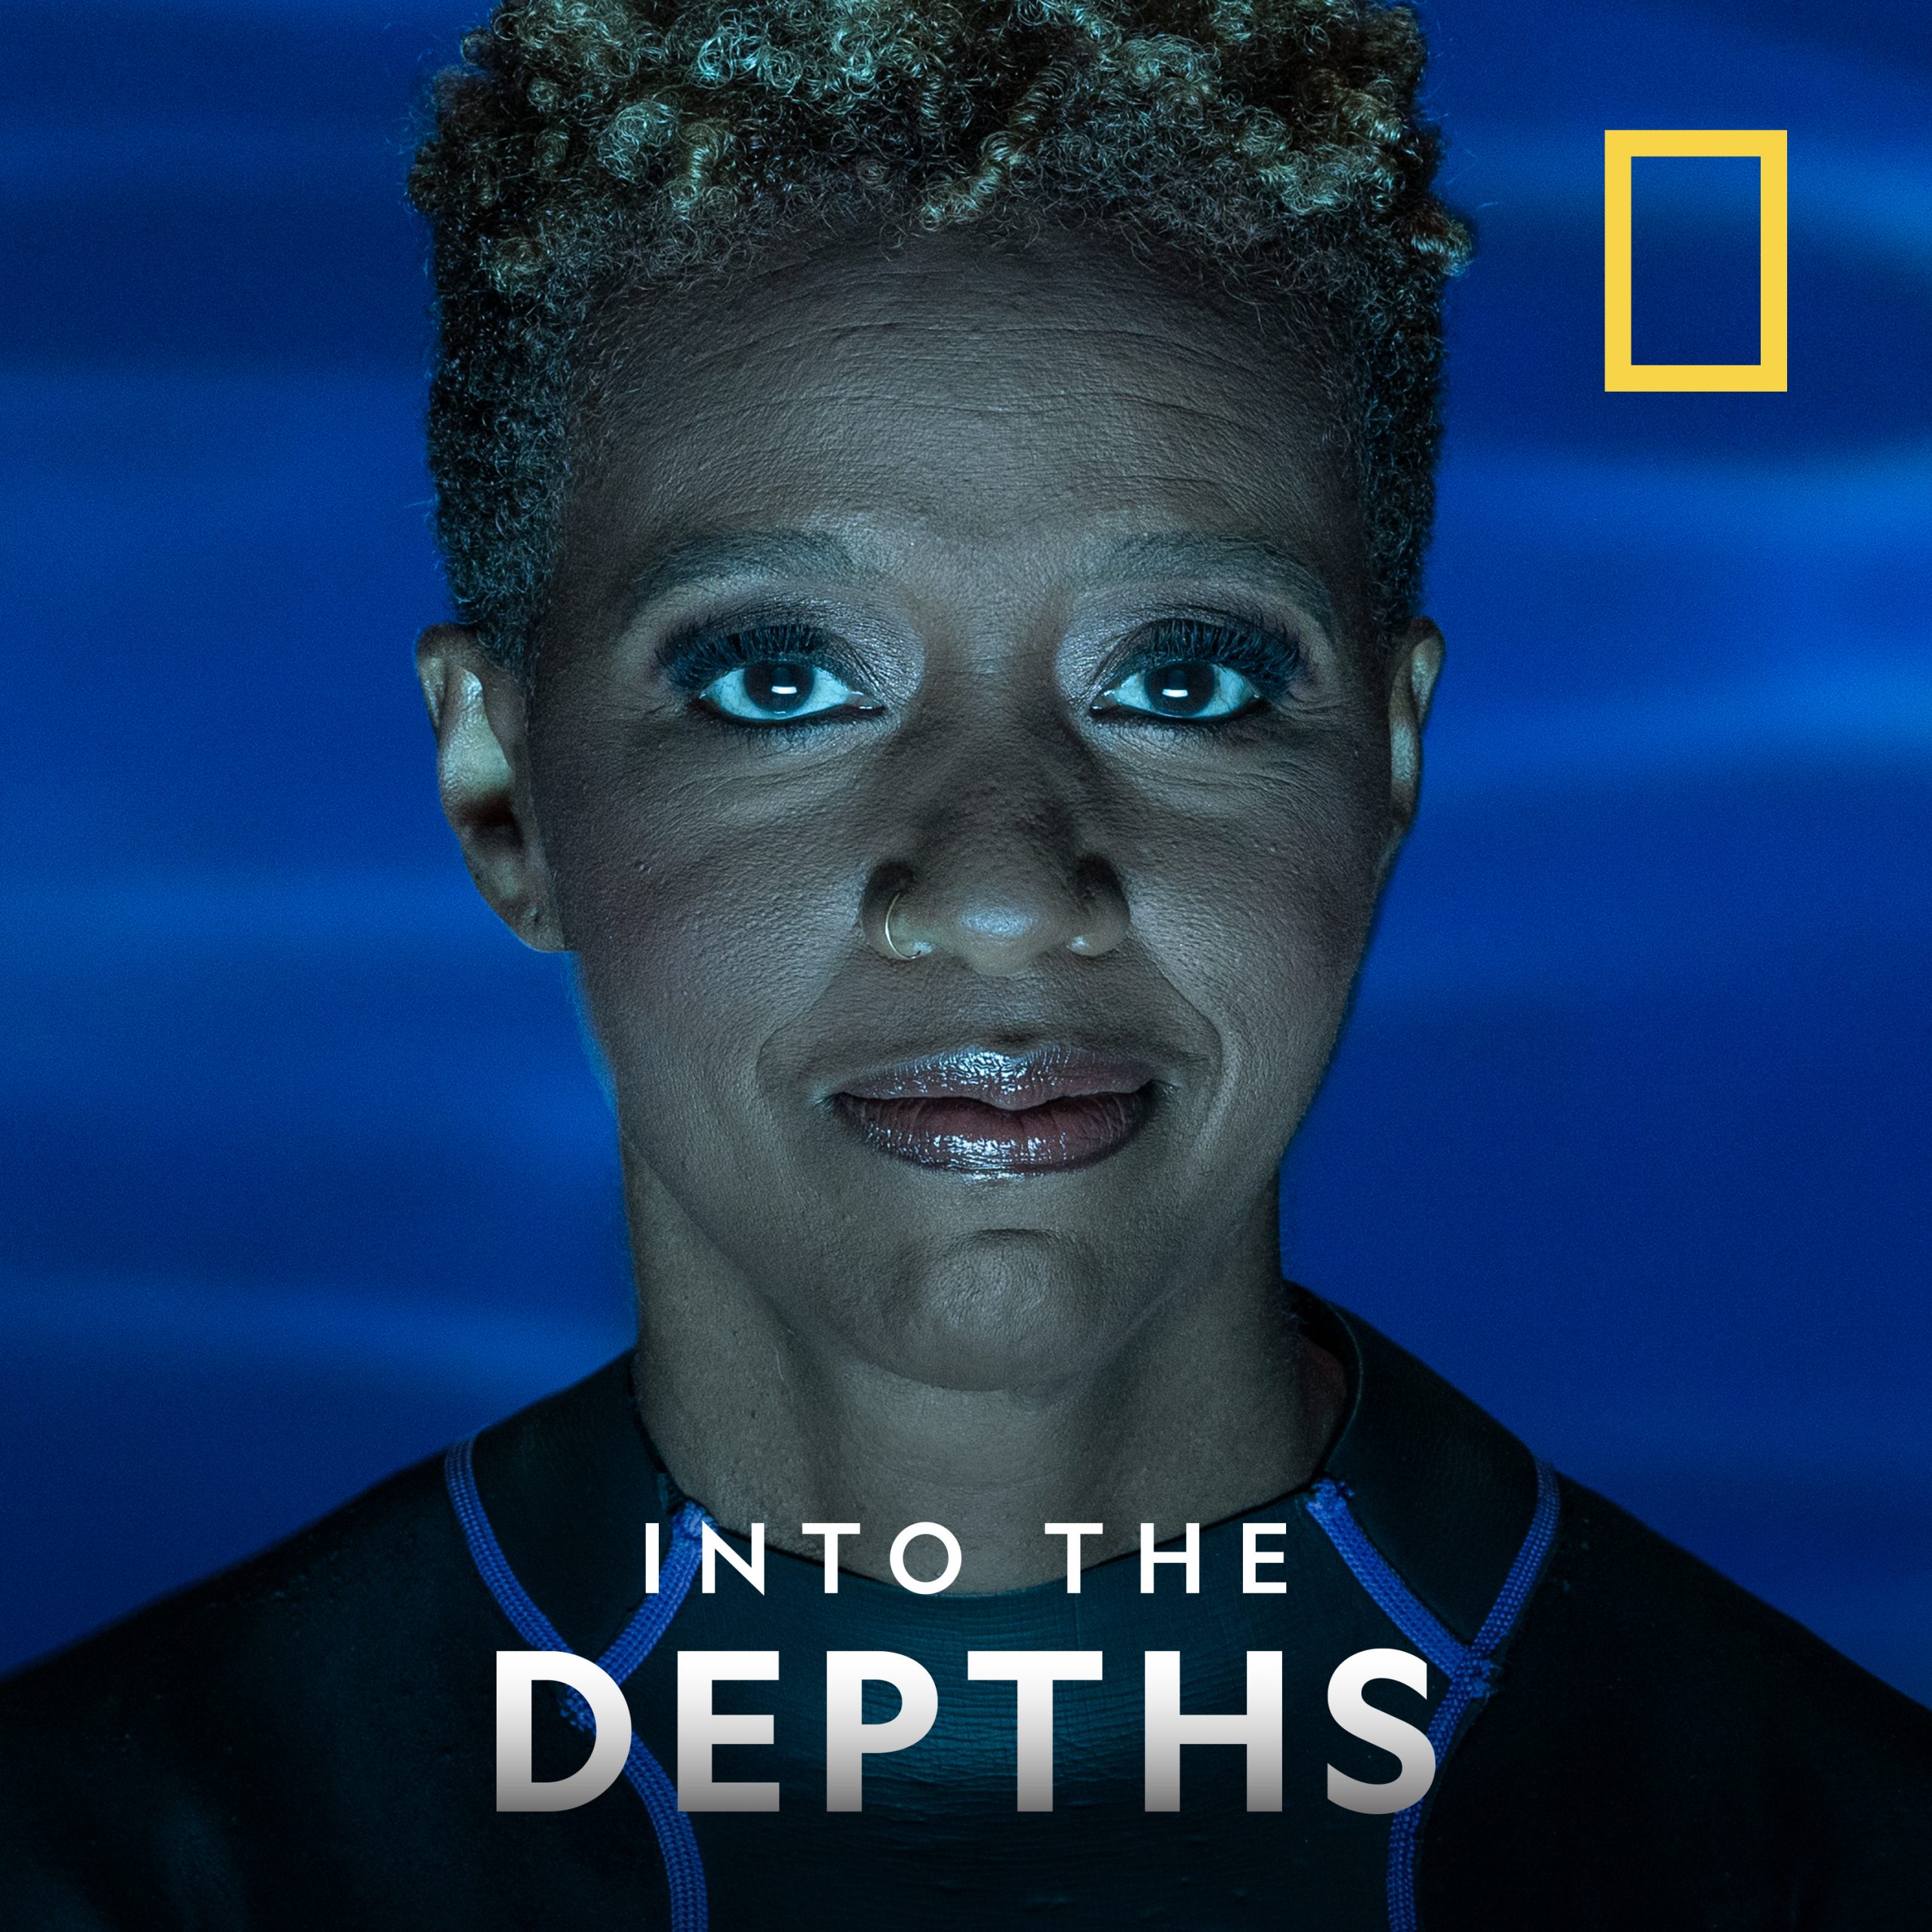 NATIONAL GEOGRAPHIC DIVES INTO THE UNTOLD HISTORY OF THE TRANSATLANTIC SLAVE TRADE WITH NEW PODCAST, INTO THE DEPTHS, LAUNCHING JAN. 27